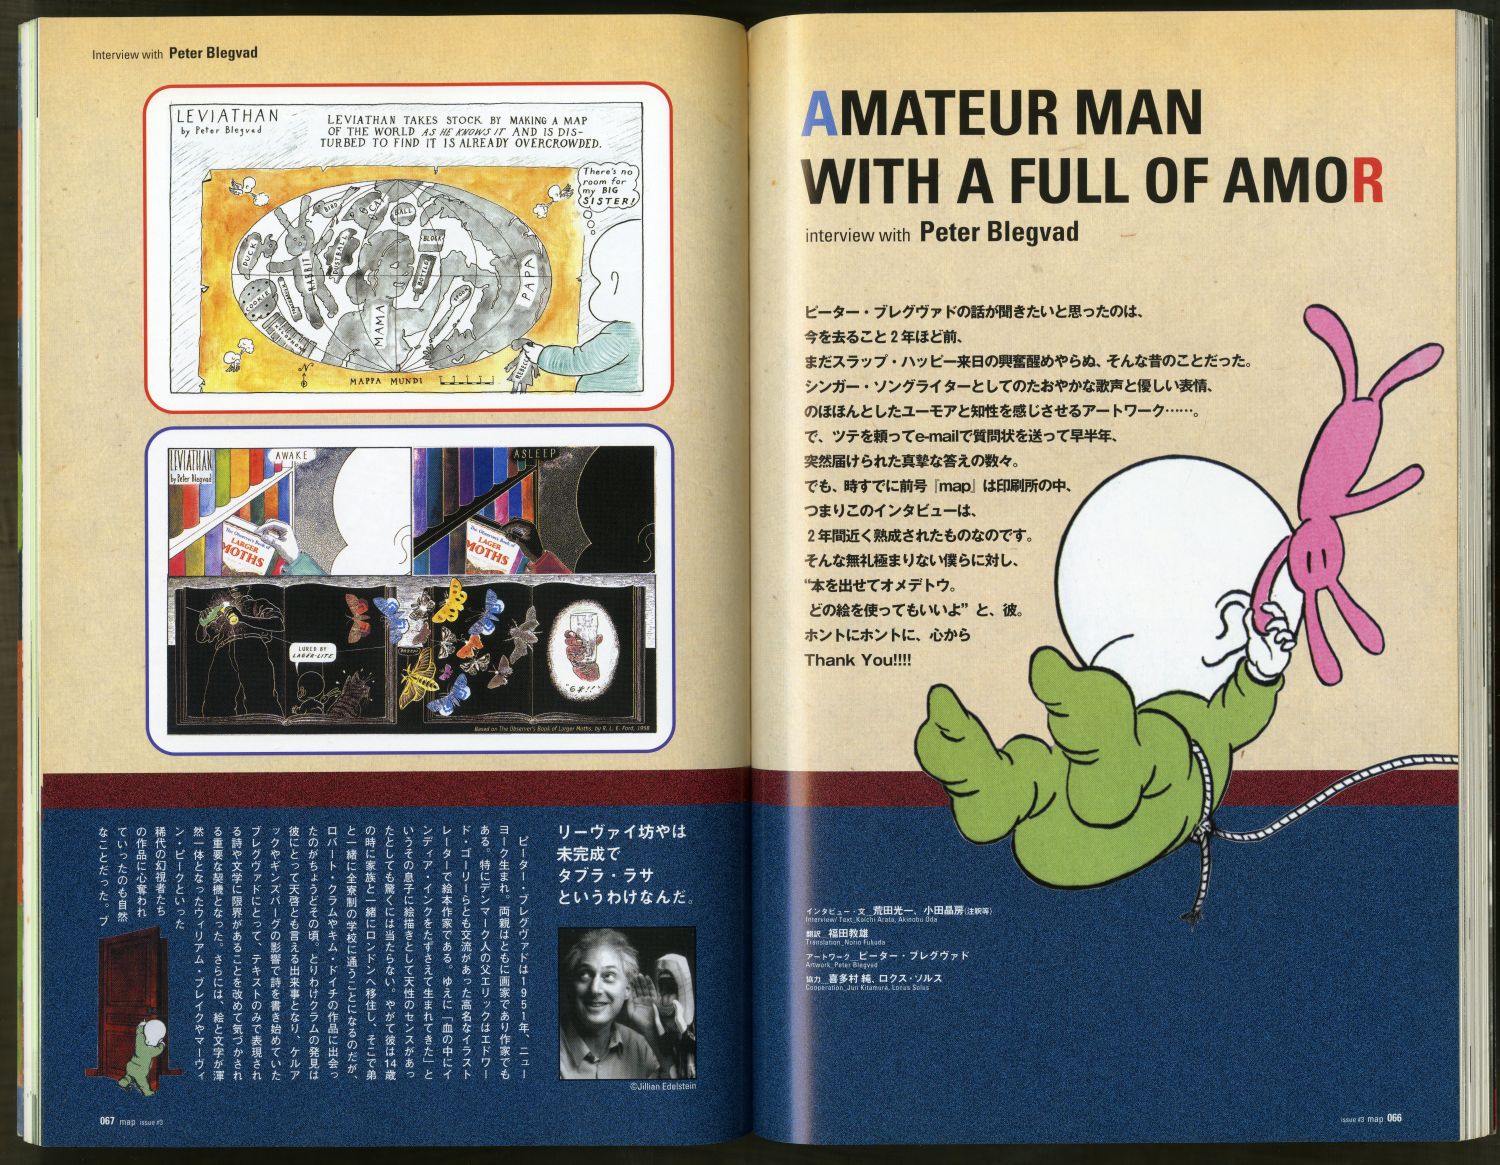 『map』issue #03 summer 2002「AMATEUR MAN WITH A FULL OF AMOR」のページから